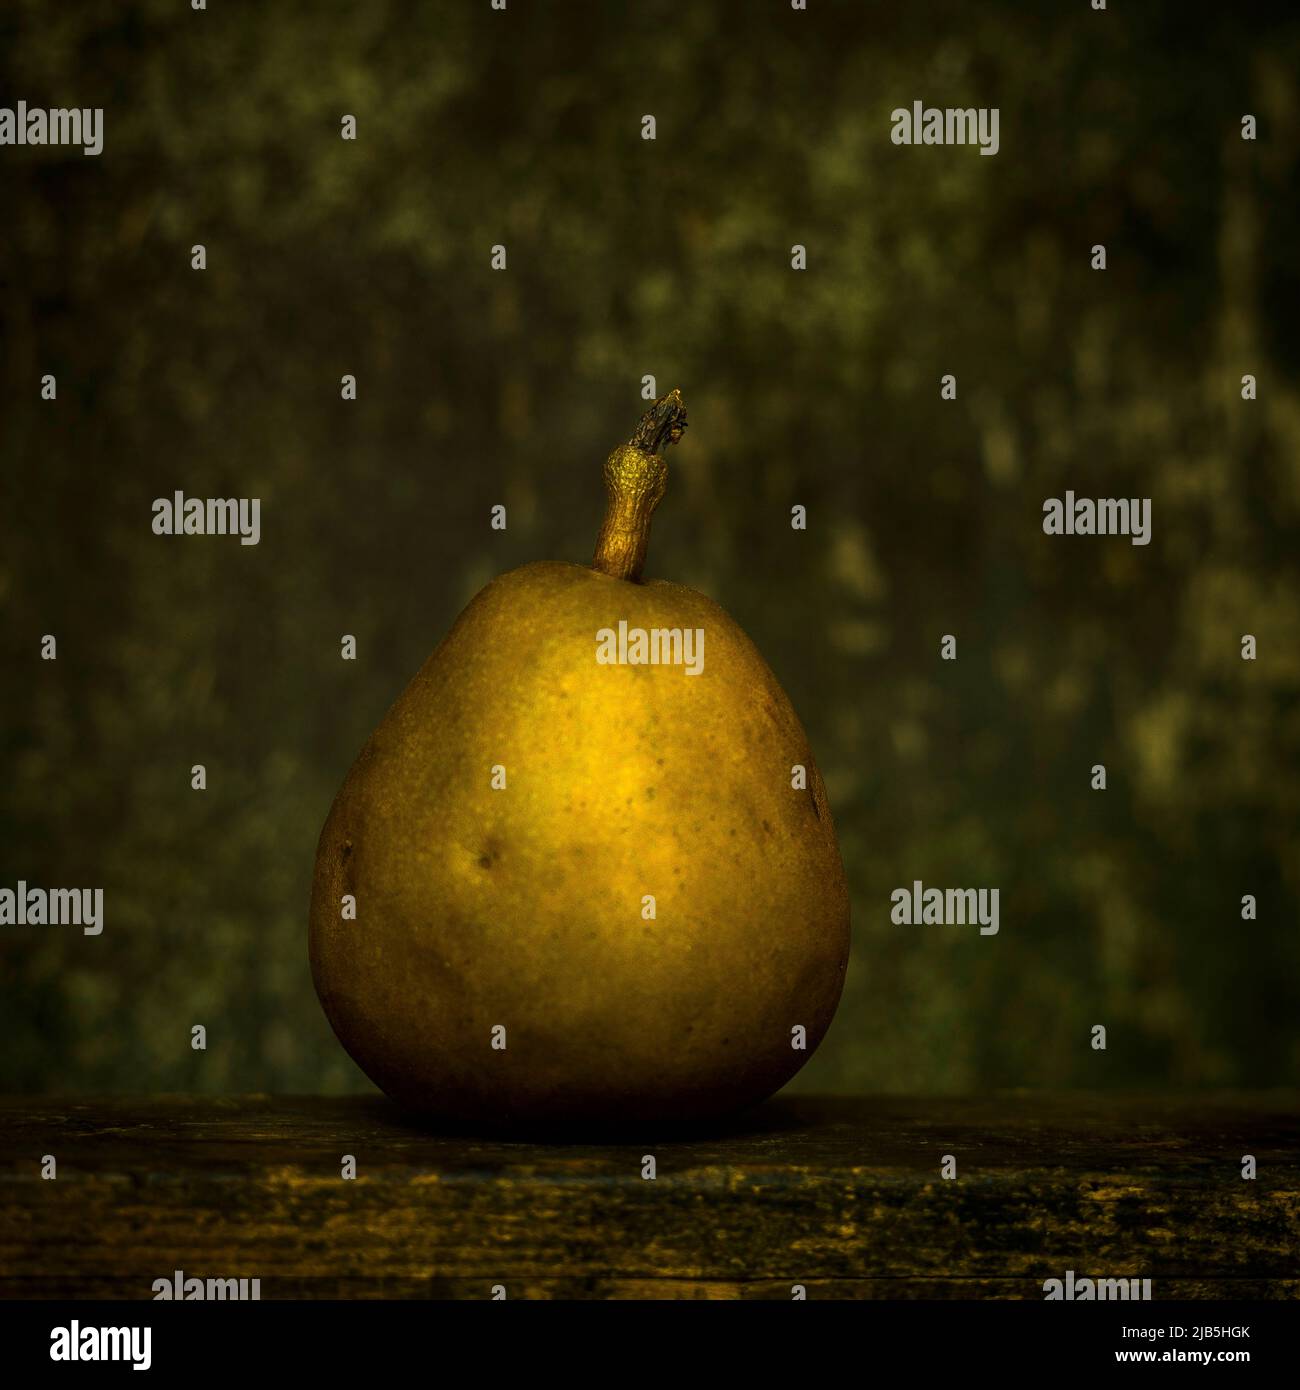 Pear on a brown background, Stock Photo